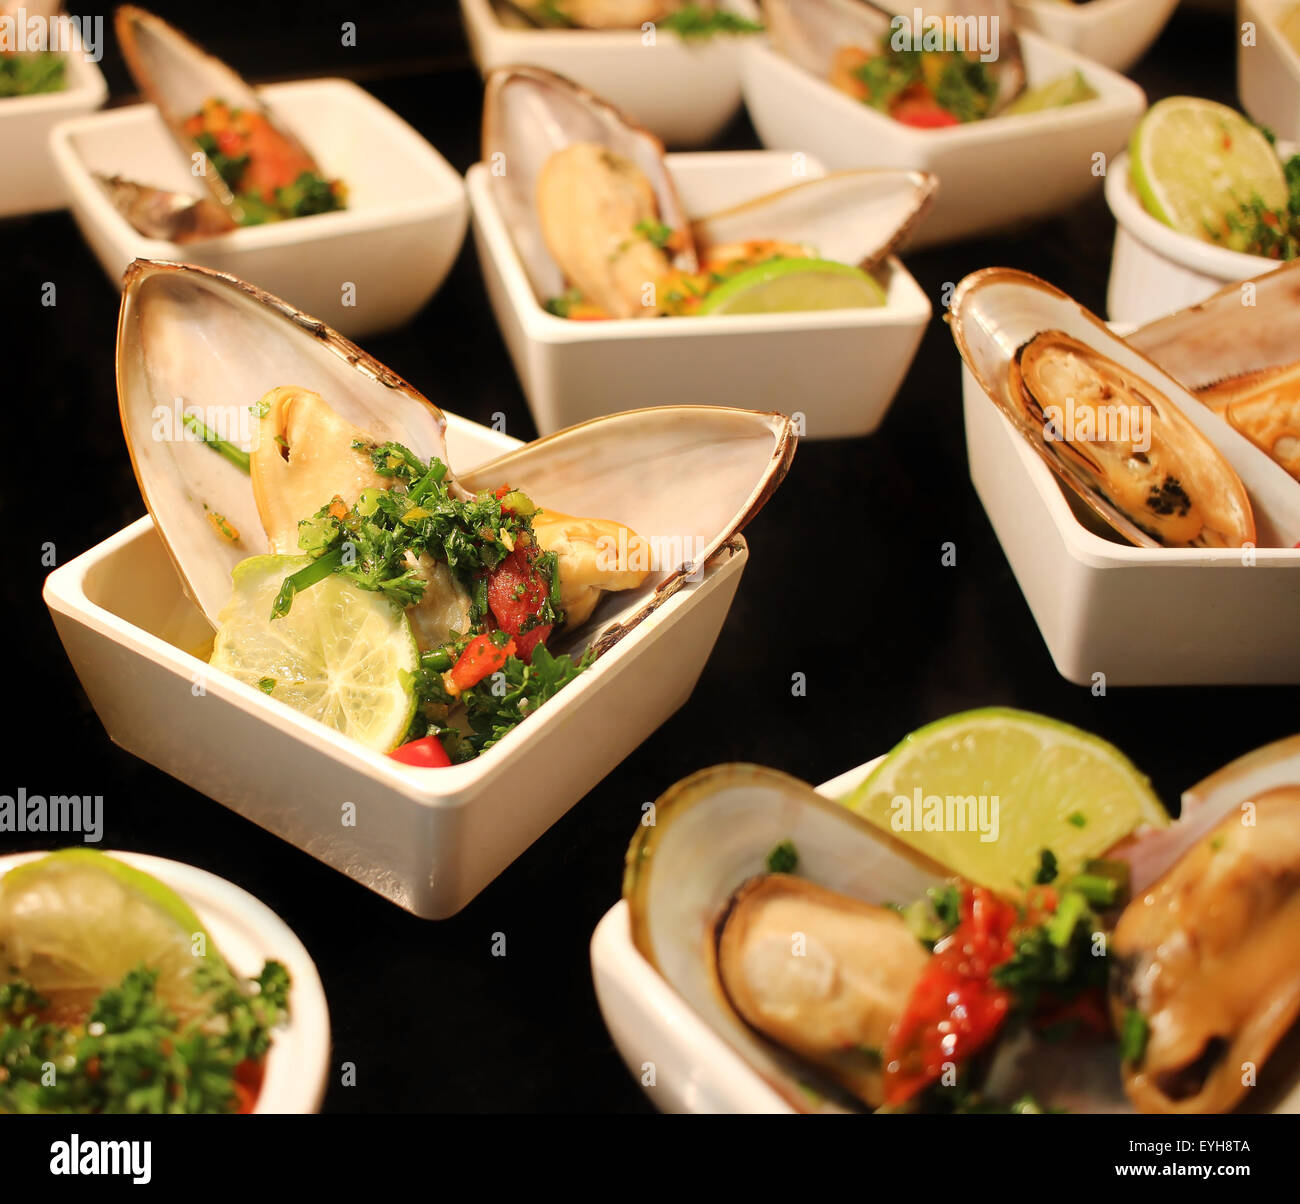 Small seafood appetizers at the restaurant Stock Photo